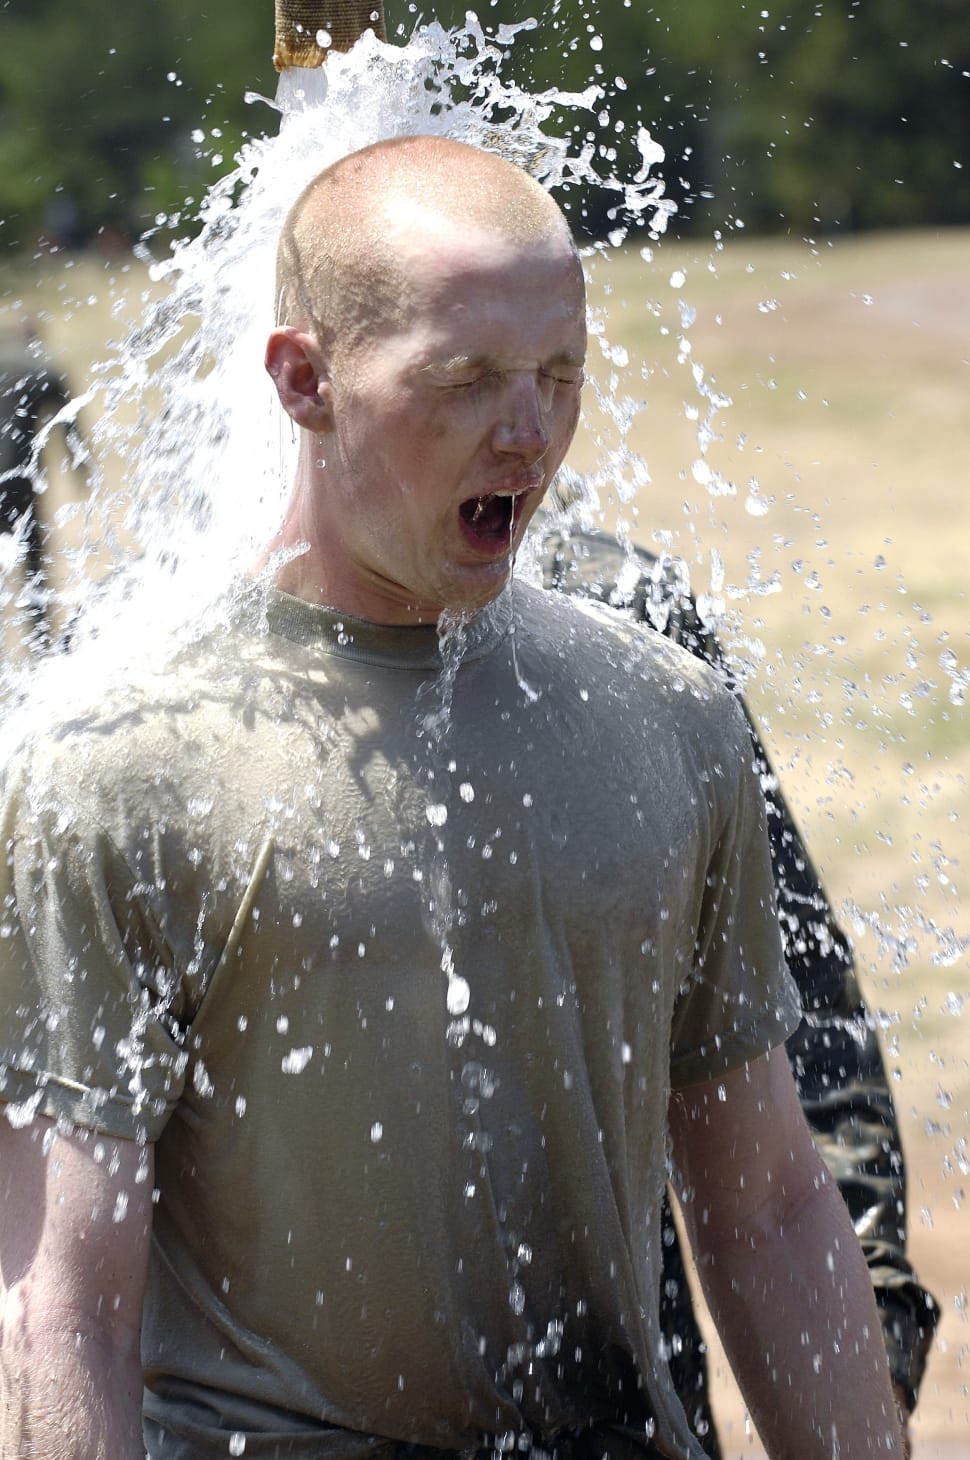 military trainee got bathed with fire hose preview